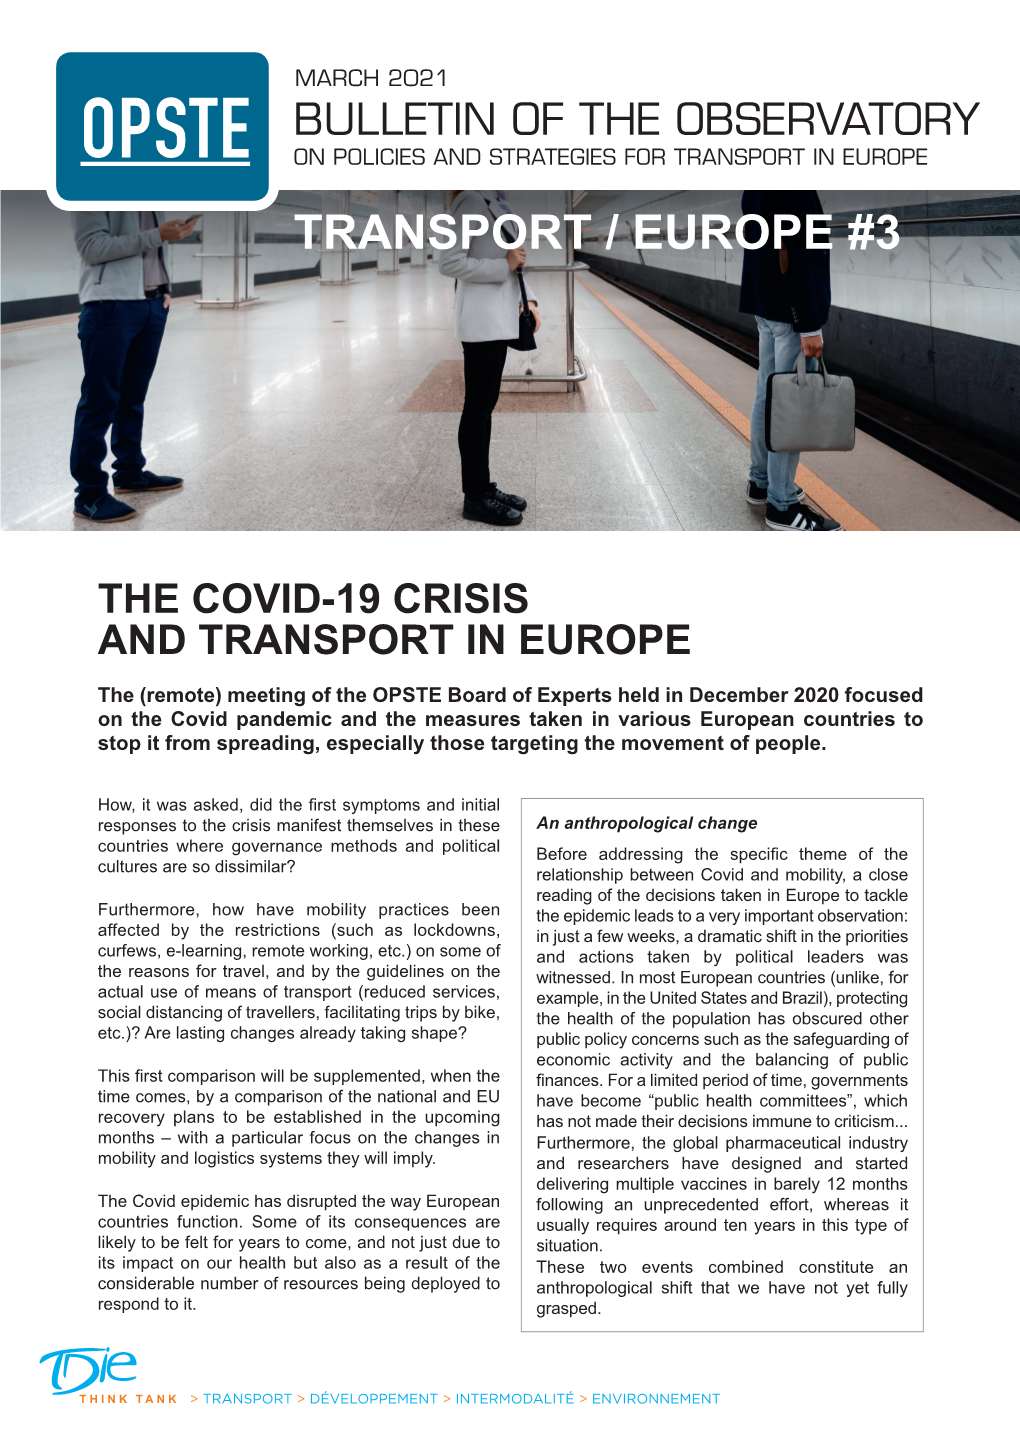 The Covid-19 Crisis and Transport in Europe